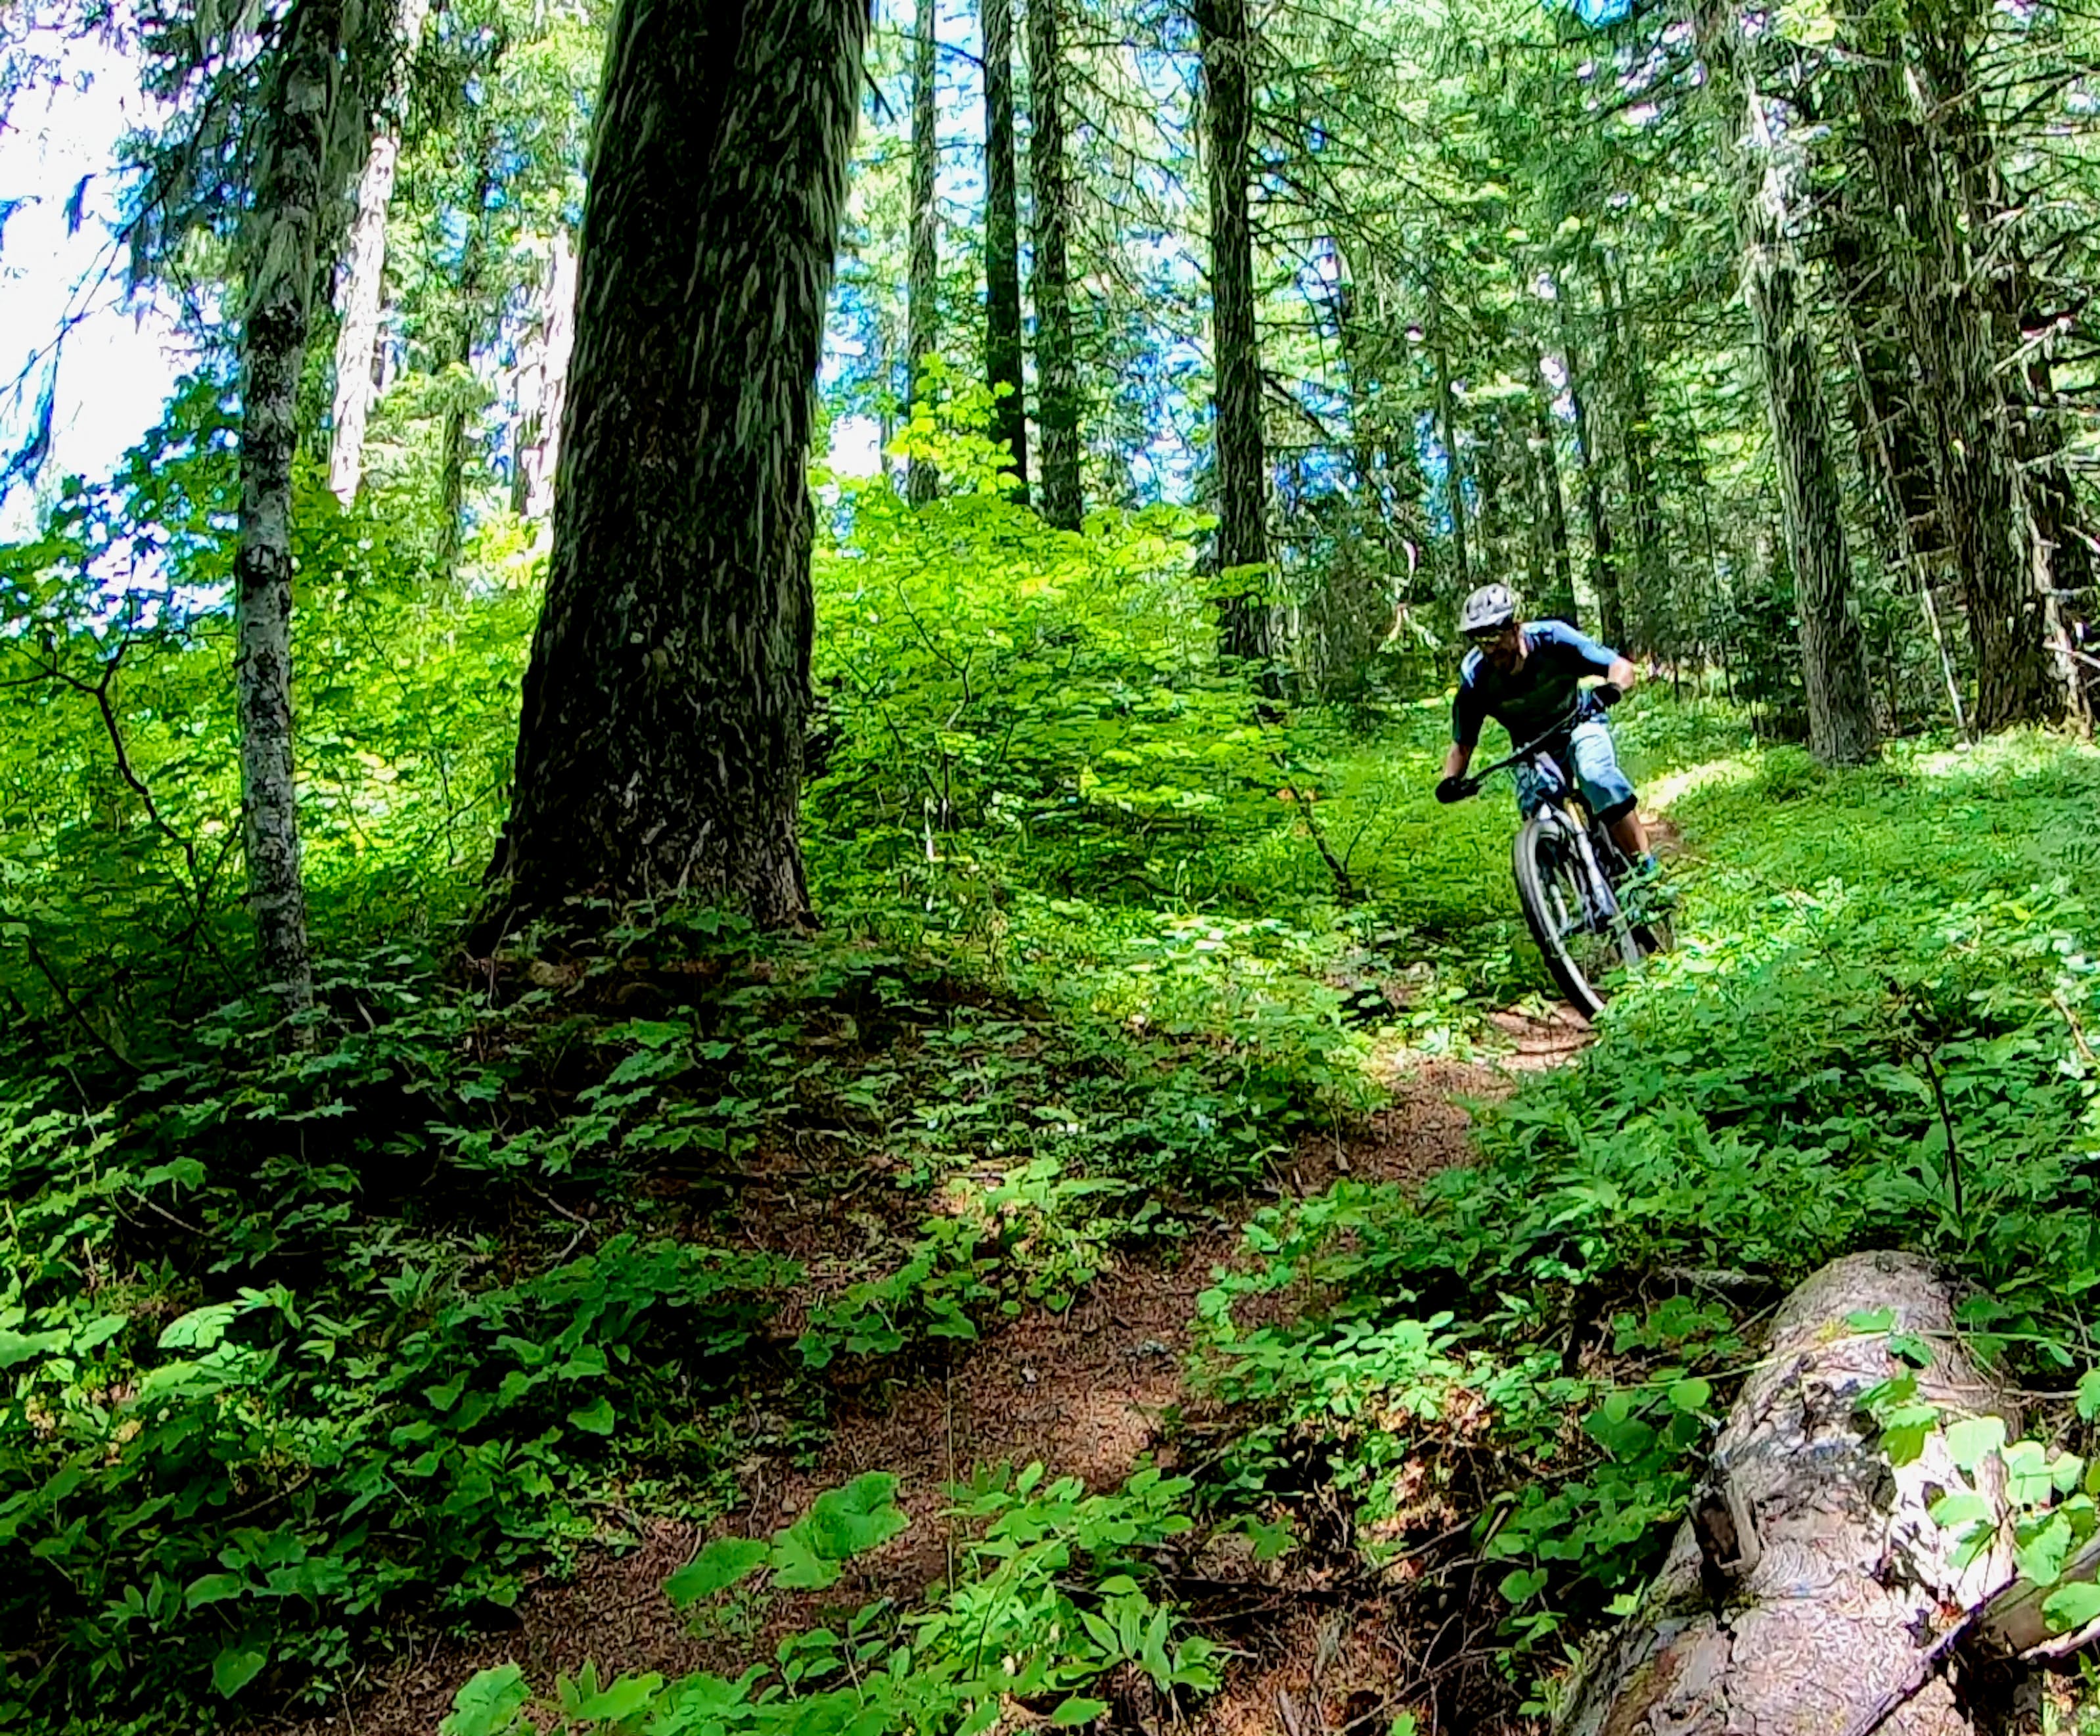 8 of the Most Technical Mountain Bike Trails in the USA, According